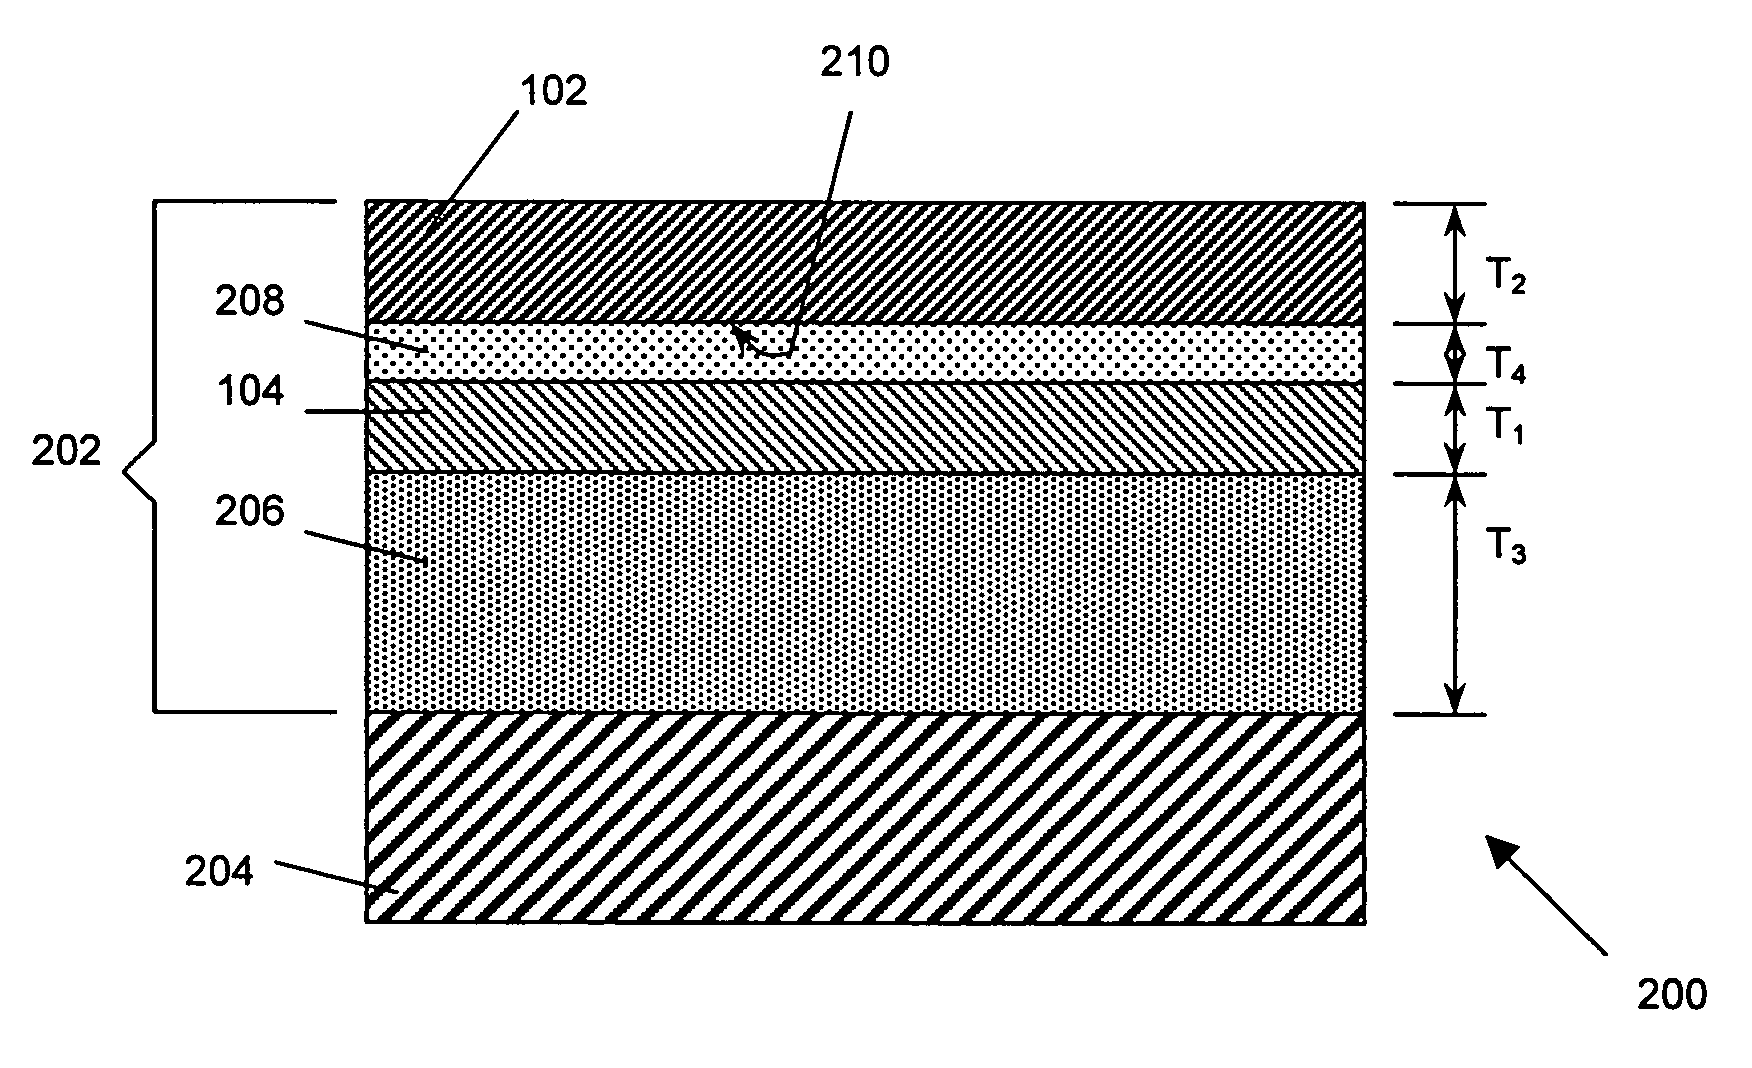 Methods for preserving strained semiconductor substrate layers during CMOS processing